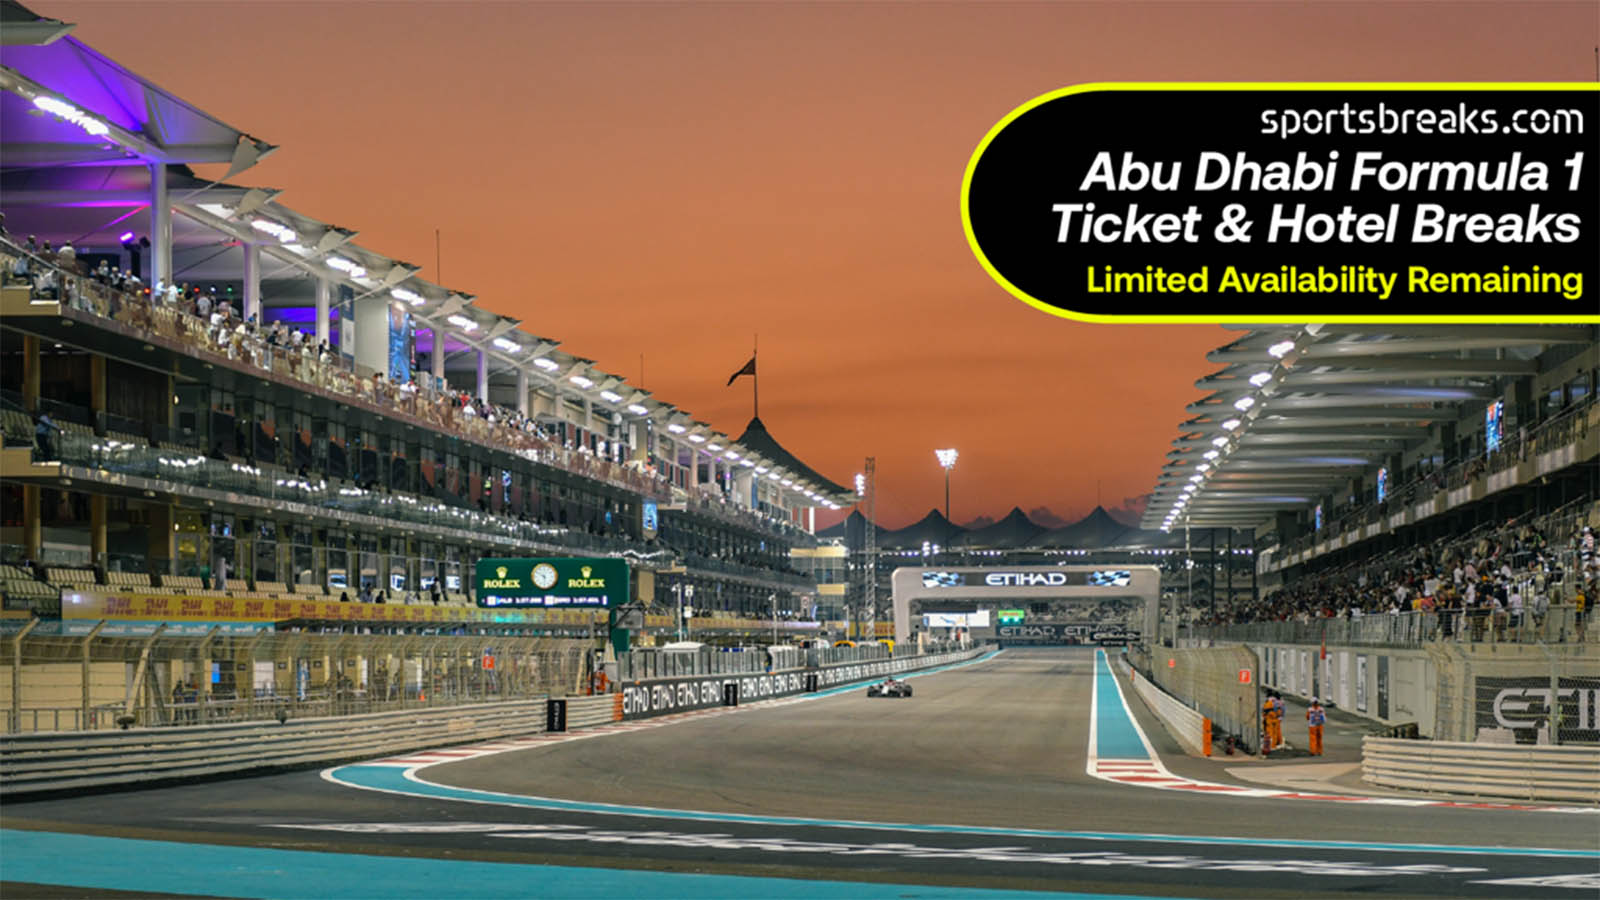 Abu Dhabi Grand Prix tickets and packages on sale now with SportsBreaks